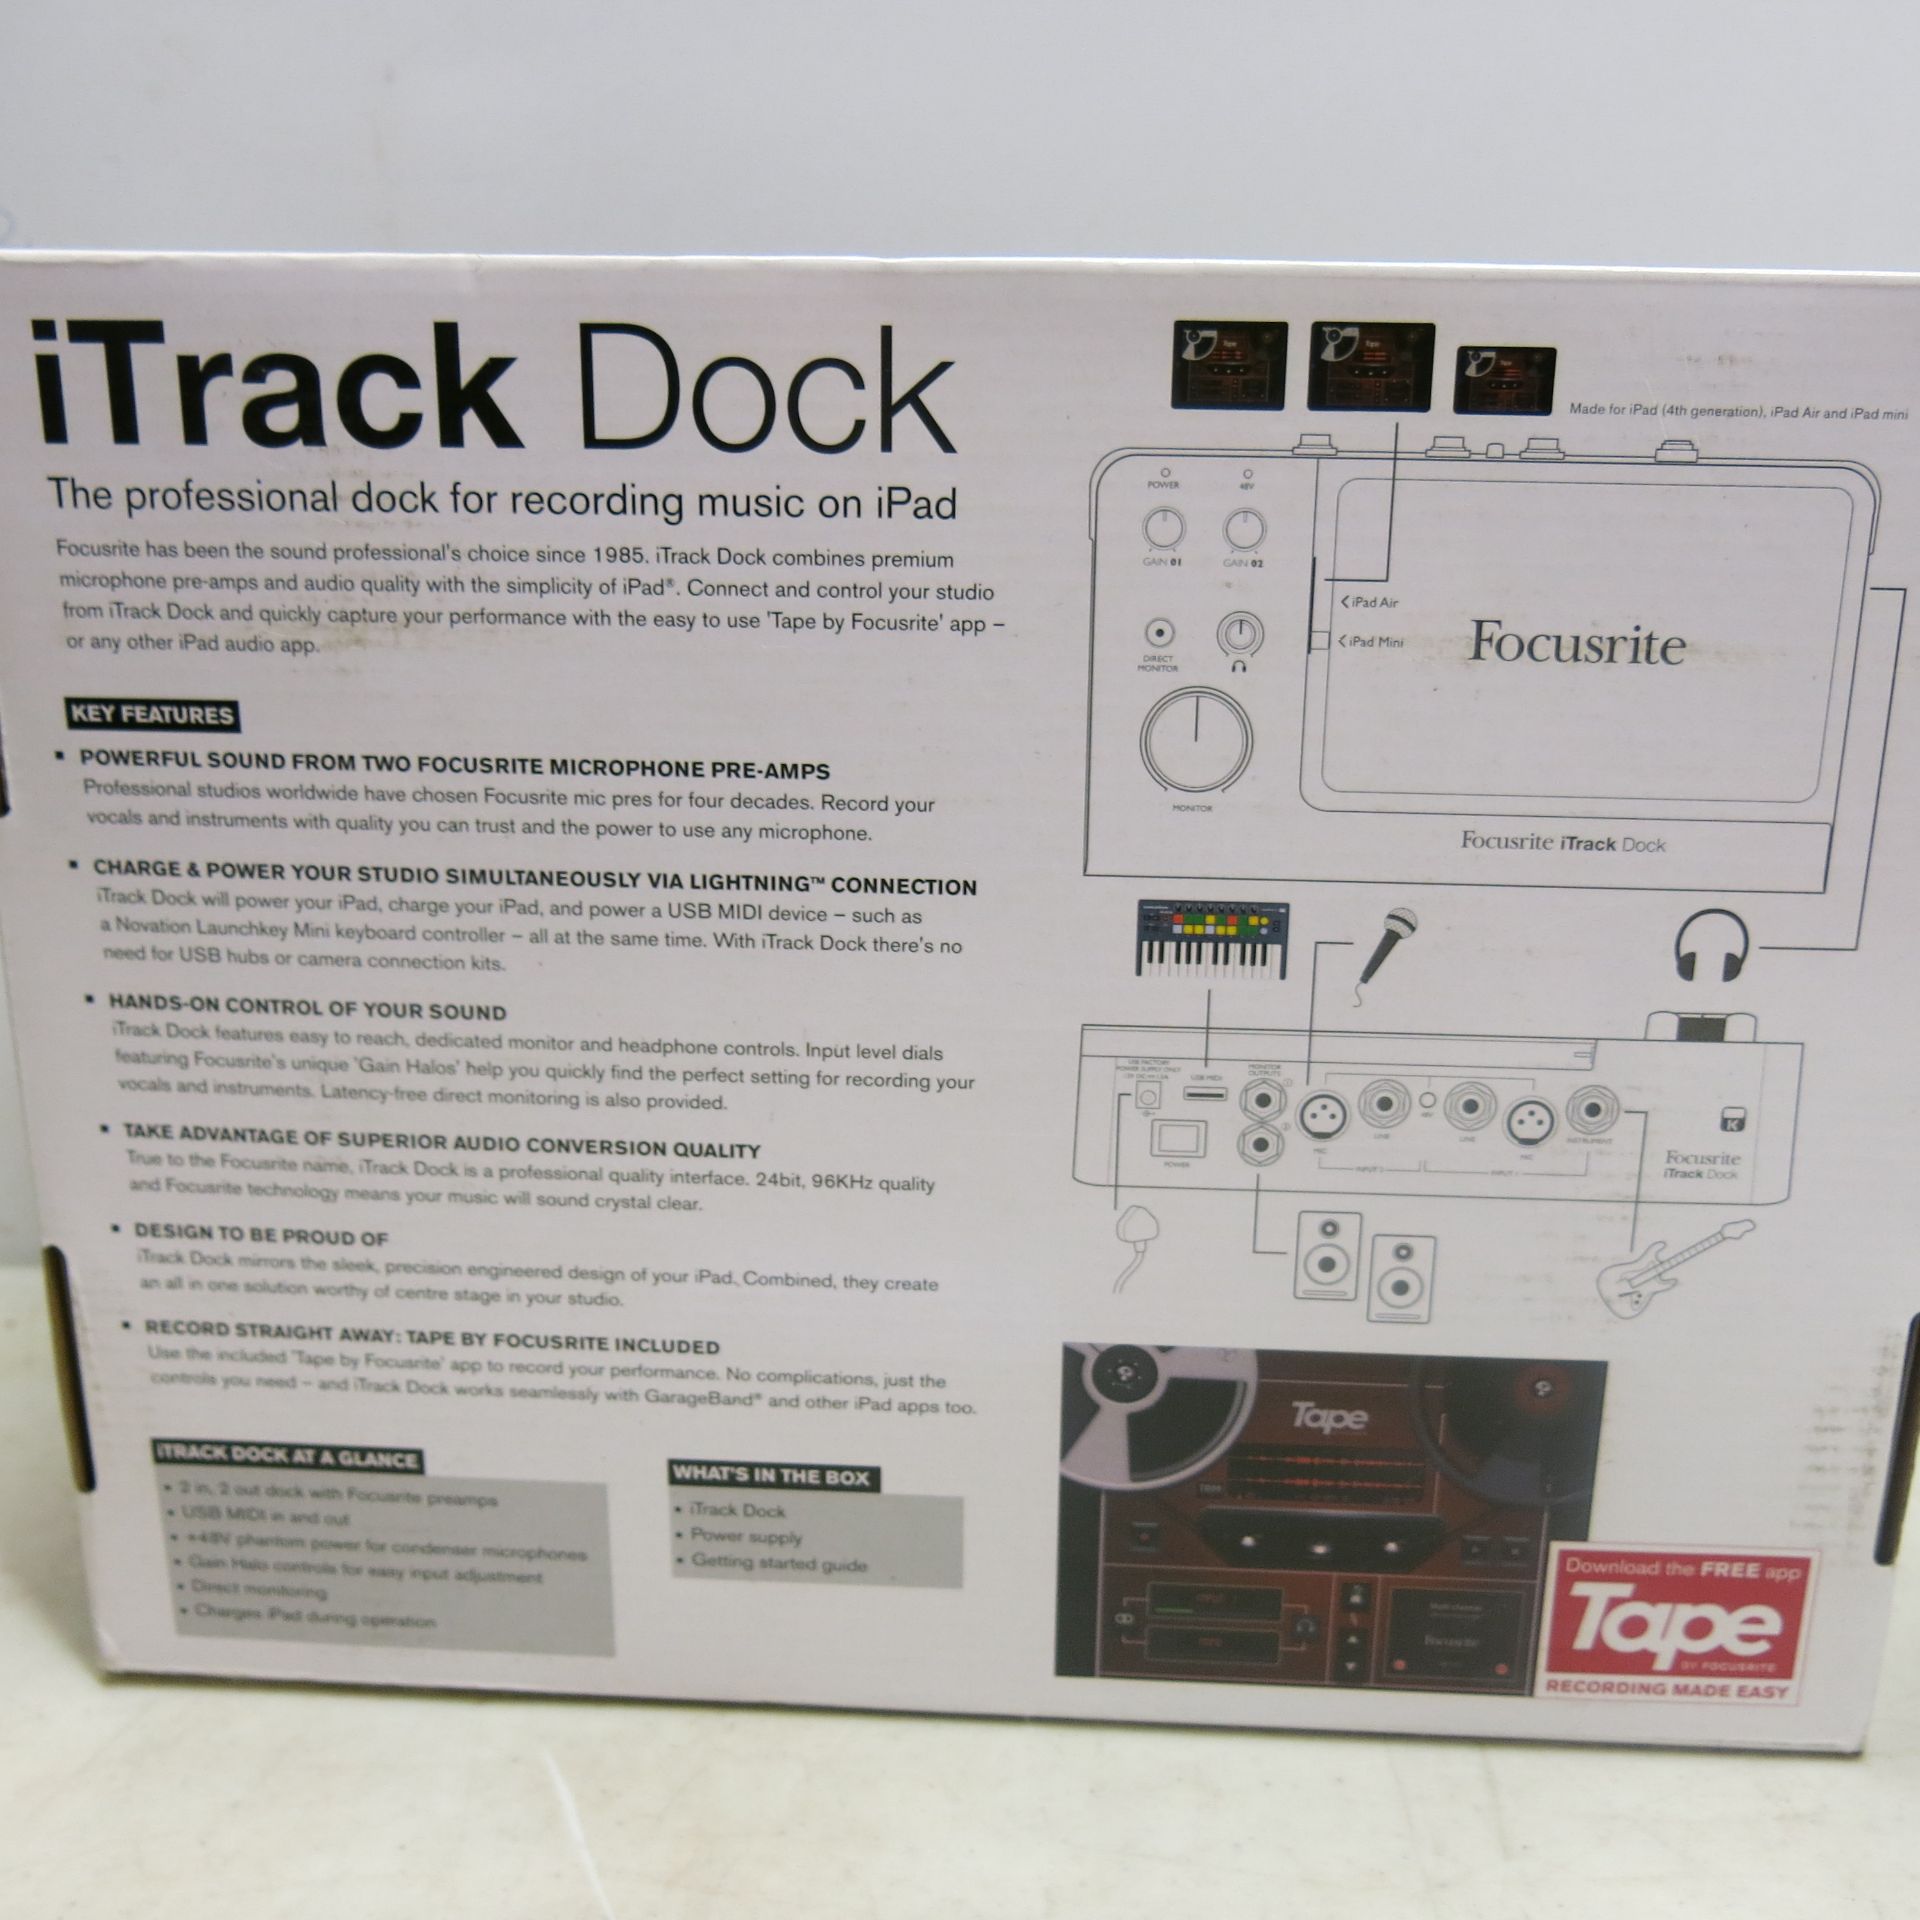 Focusrite Itrack Dock, Professional Dock for Recording Music on iPad, New/Boxed - Image 2 of 2